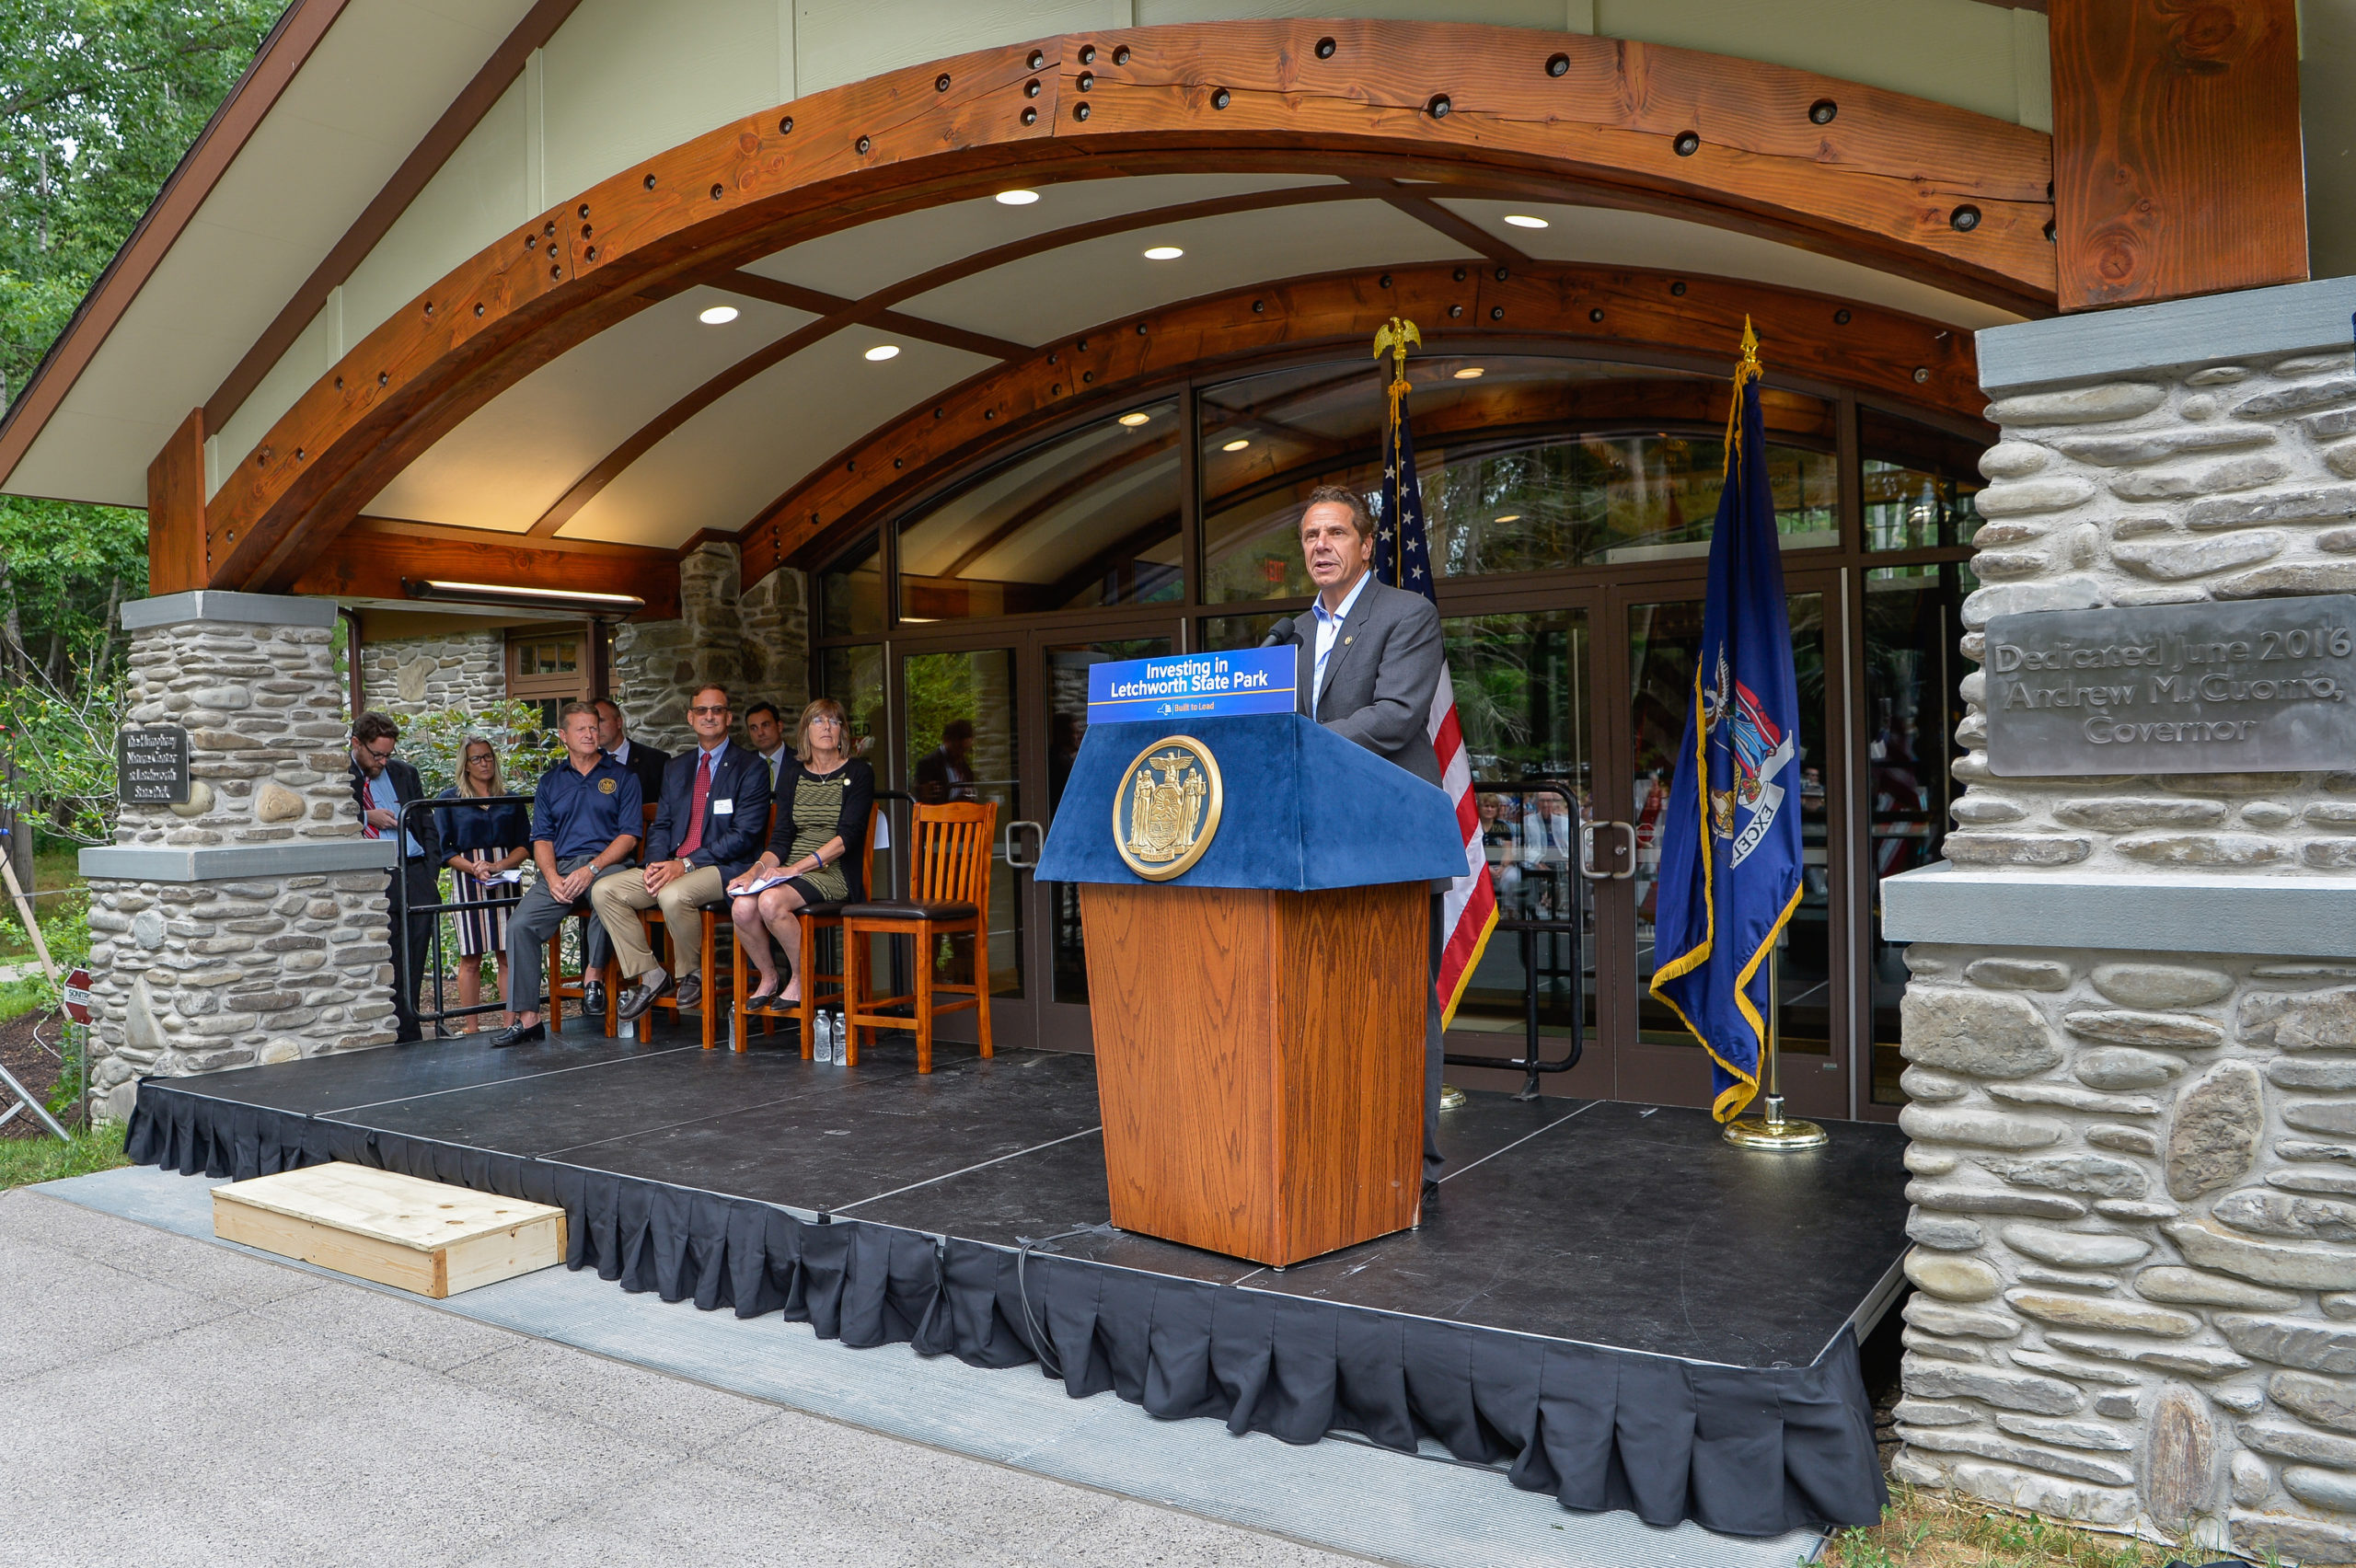 July 19, 2016- Castile, NY - Governor Andrew Cuomo dedicates The Humphrey Nature Center at Letchworth State Park